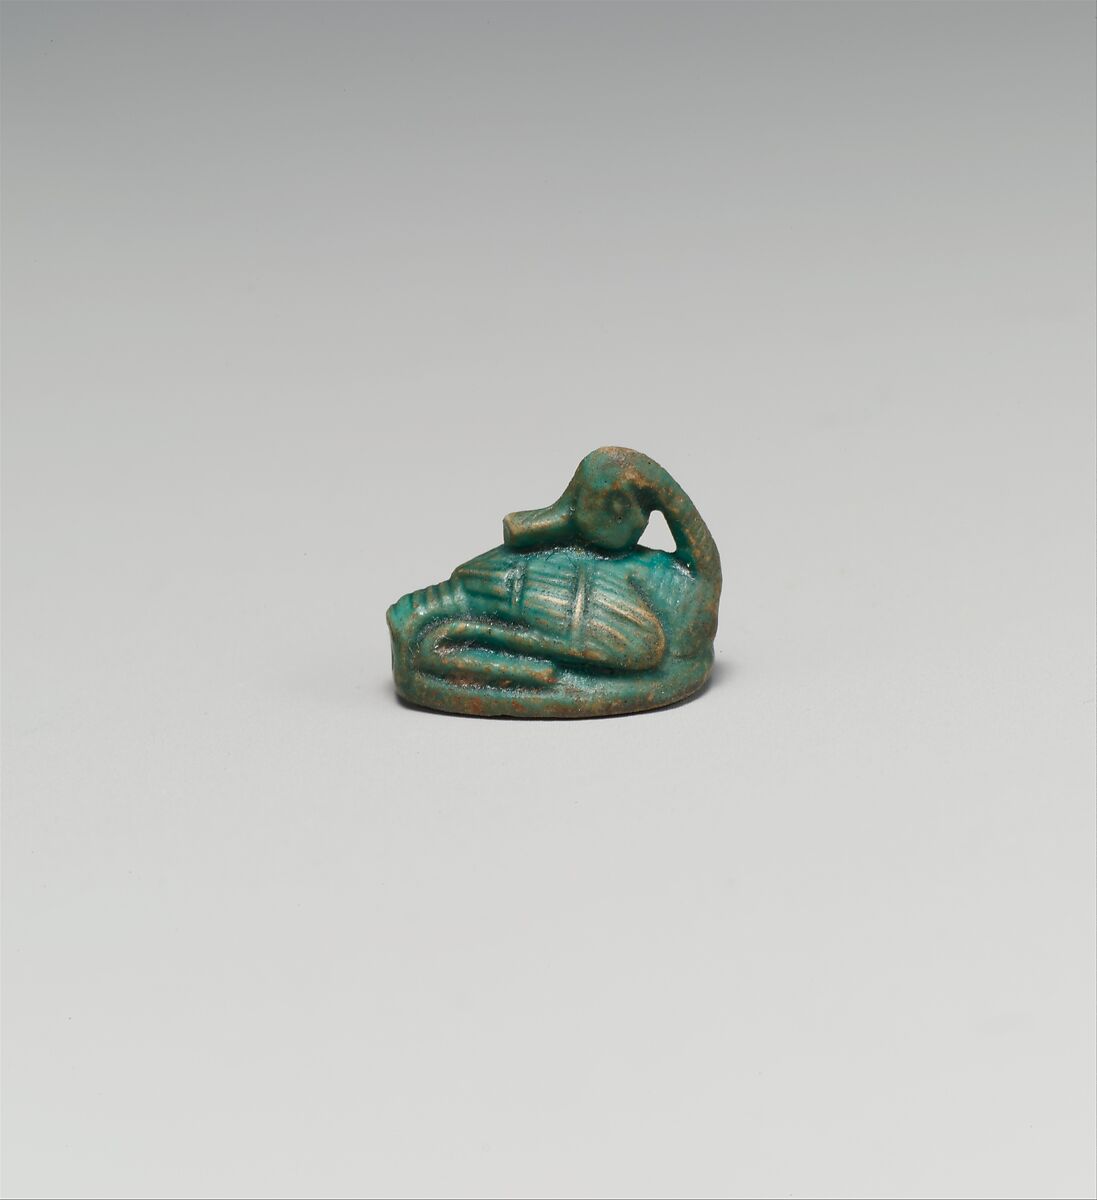 Design amulet in the form of a duck